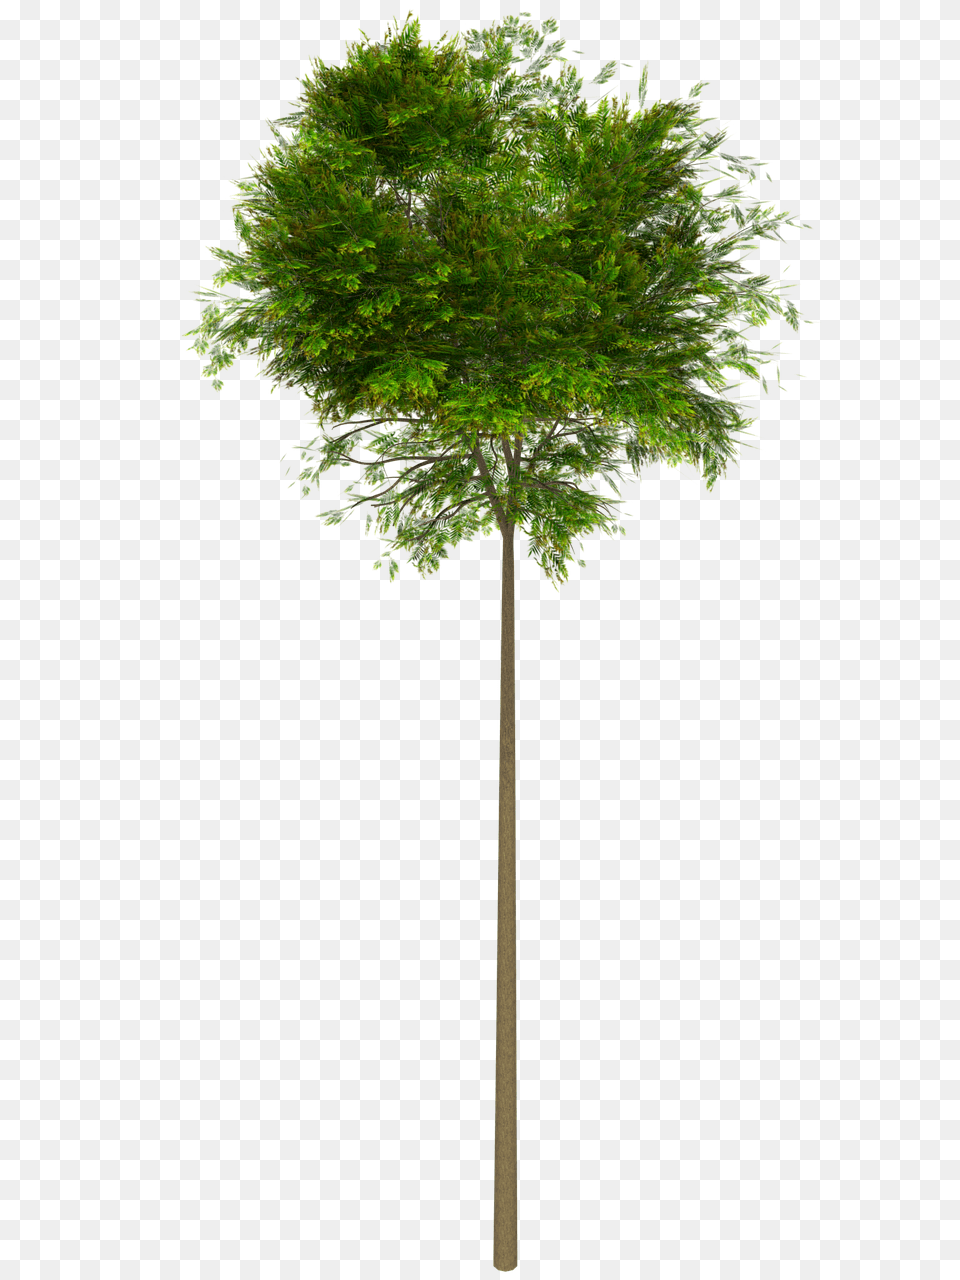 Download Hd Naturaleza High Tree, Maple, Plant, Oak, Sycamore Png